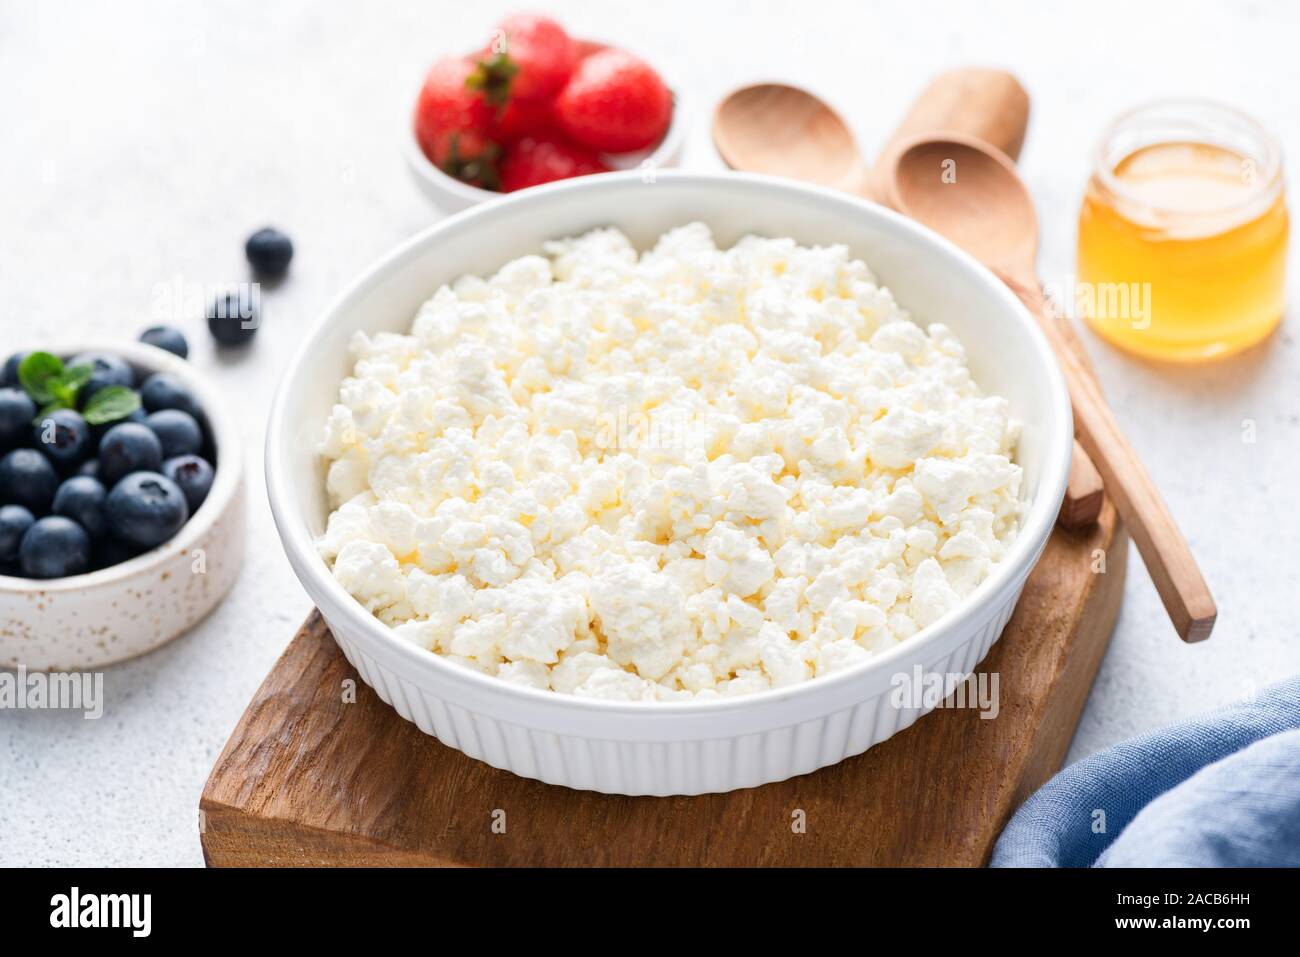 Cottage Cheese Or Ricotta In Bowl Healthy Food Dairy Product